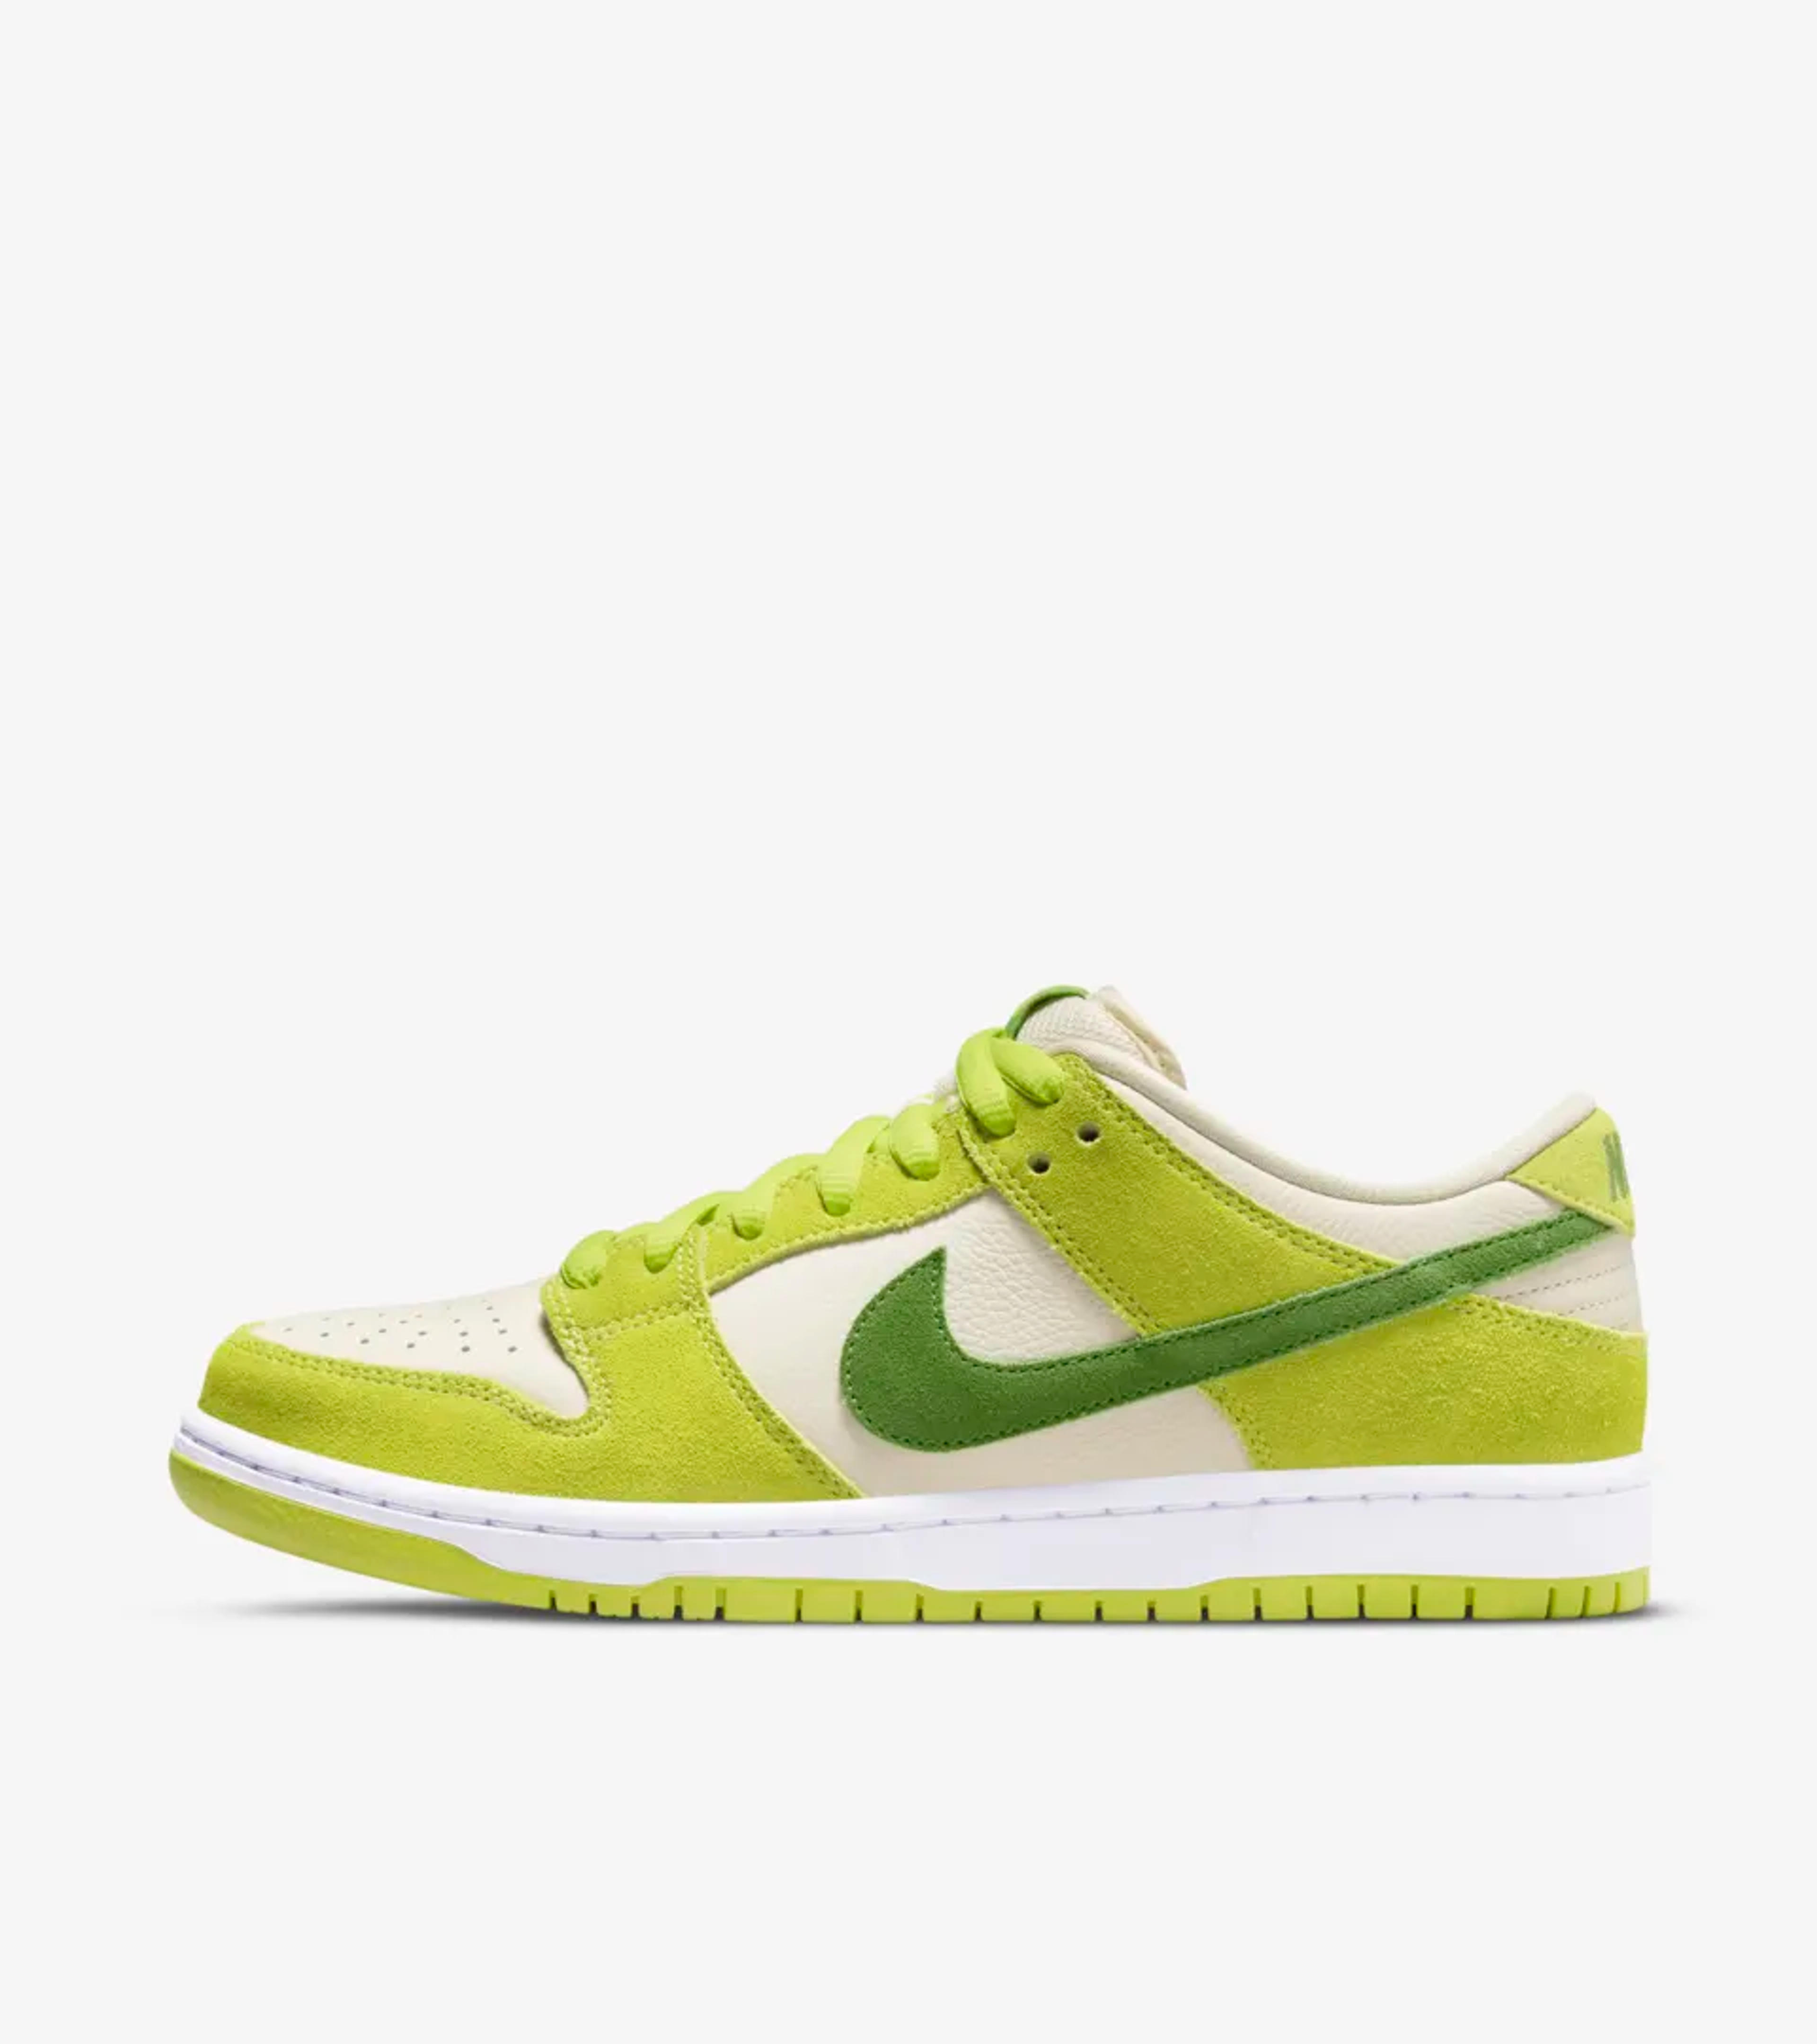 SB Dunk Low 'Sour Apple' (DM0807-300) Release Date. Nike SNKRS GB